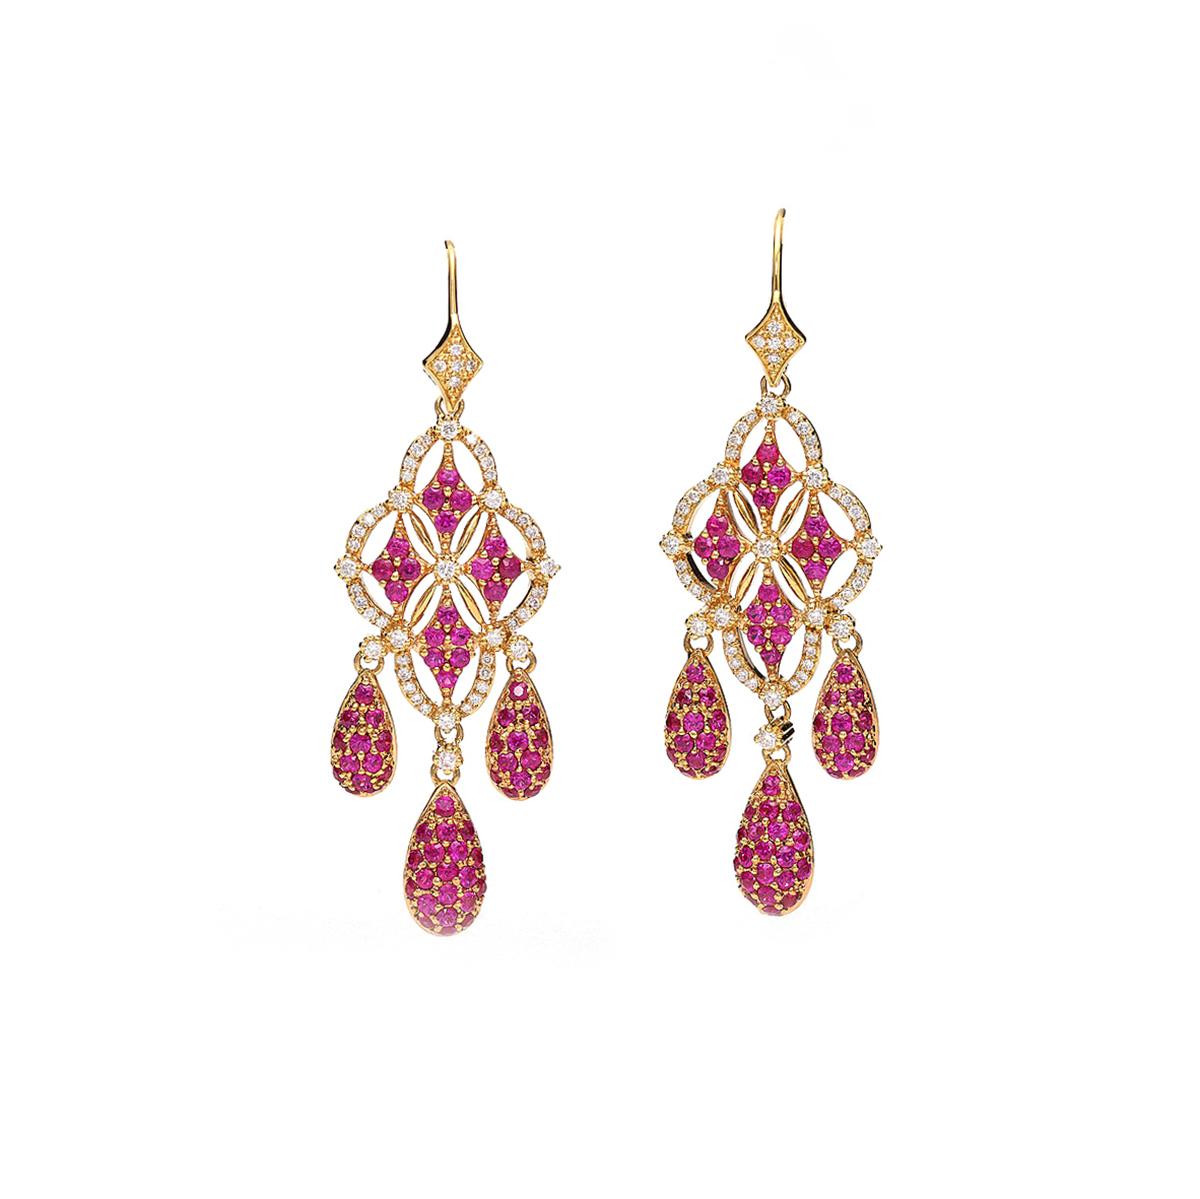 Earrings in 18kt yellow gold set with 1.28 rubies 3.80 cts and 102 diamonds 0.83 cts